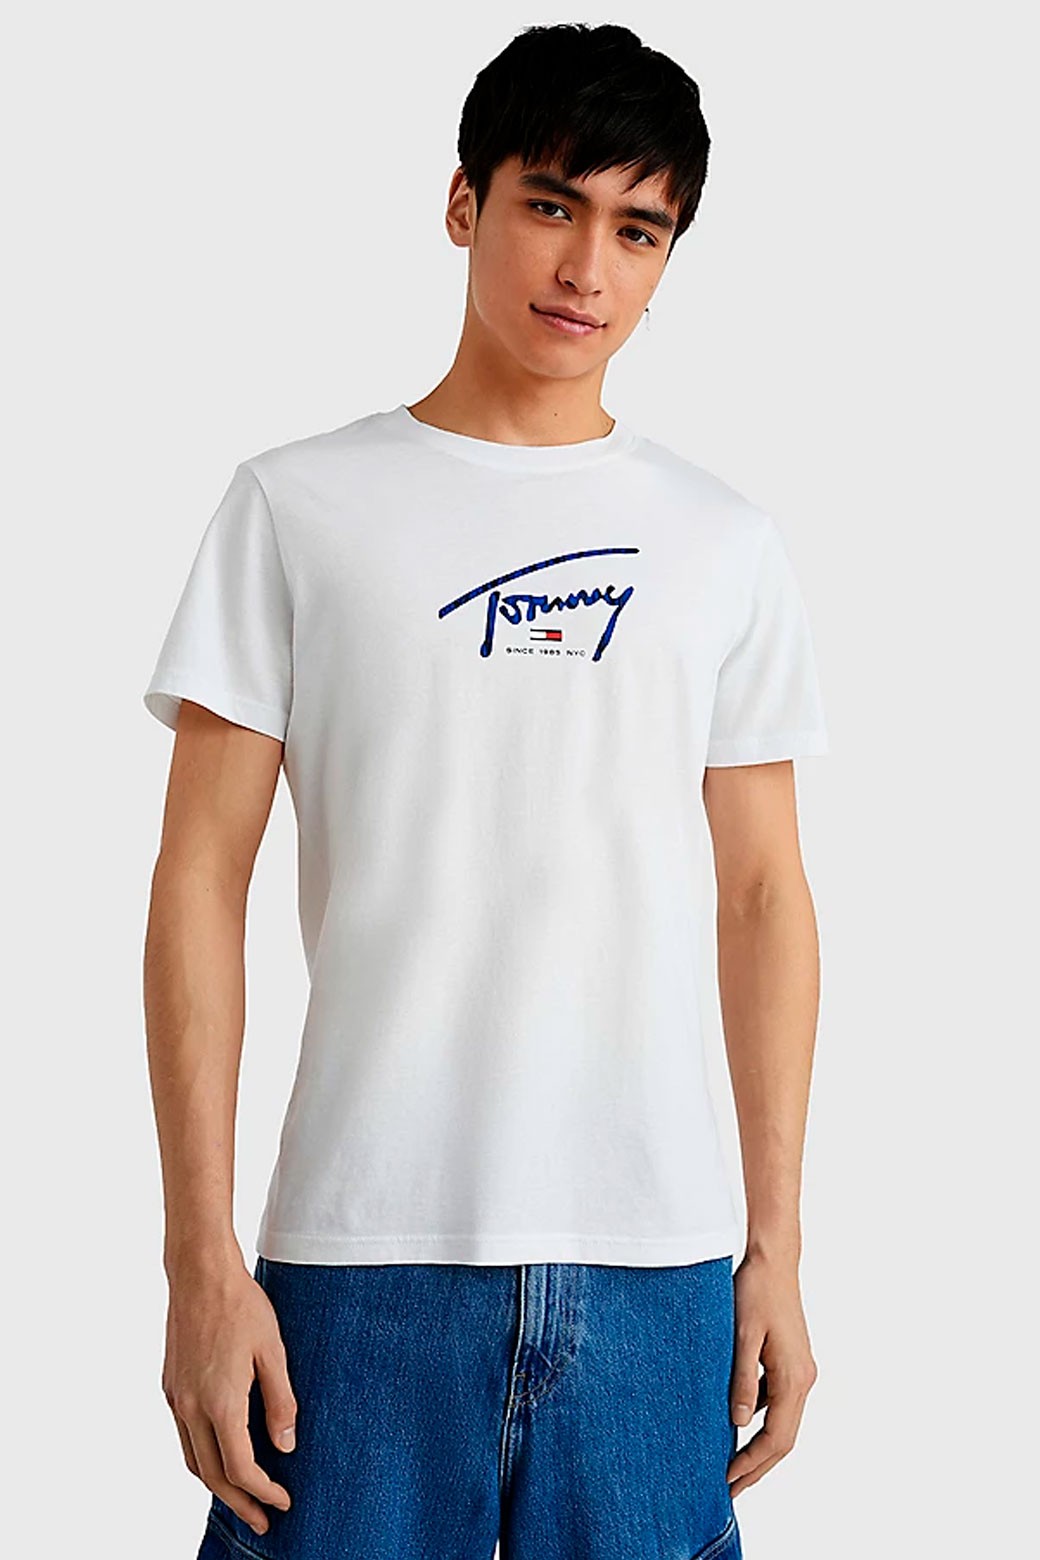 Camiseta Tommy Jeans Signature Psychedelic Blanca